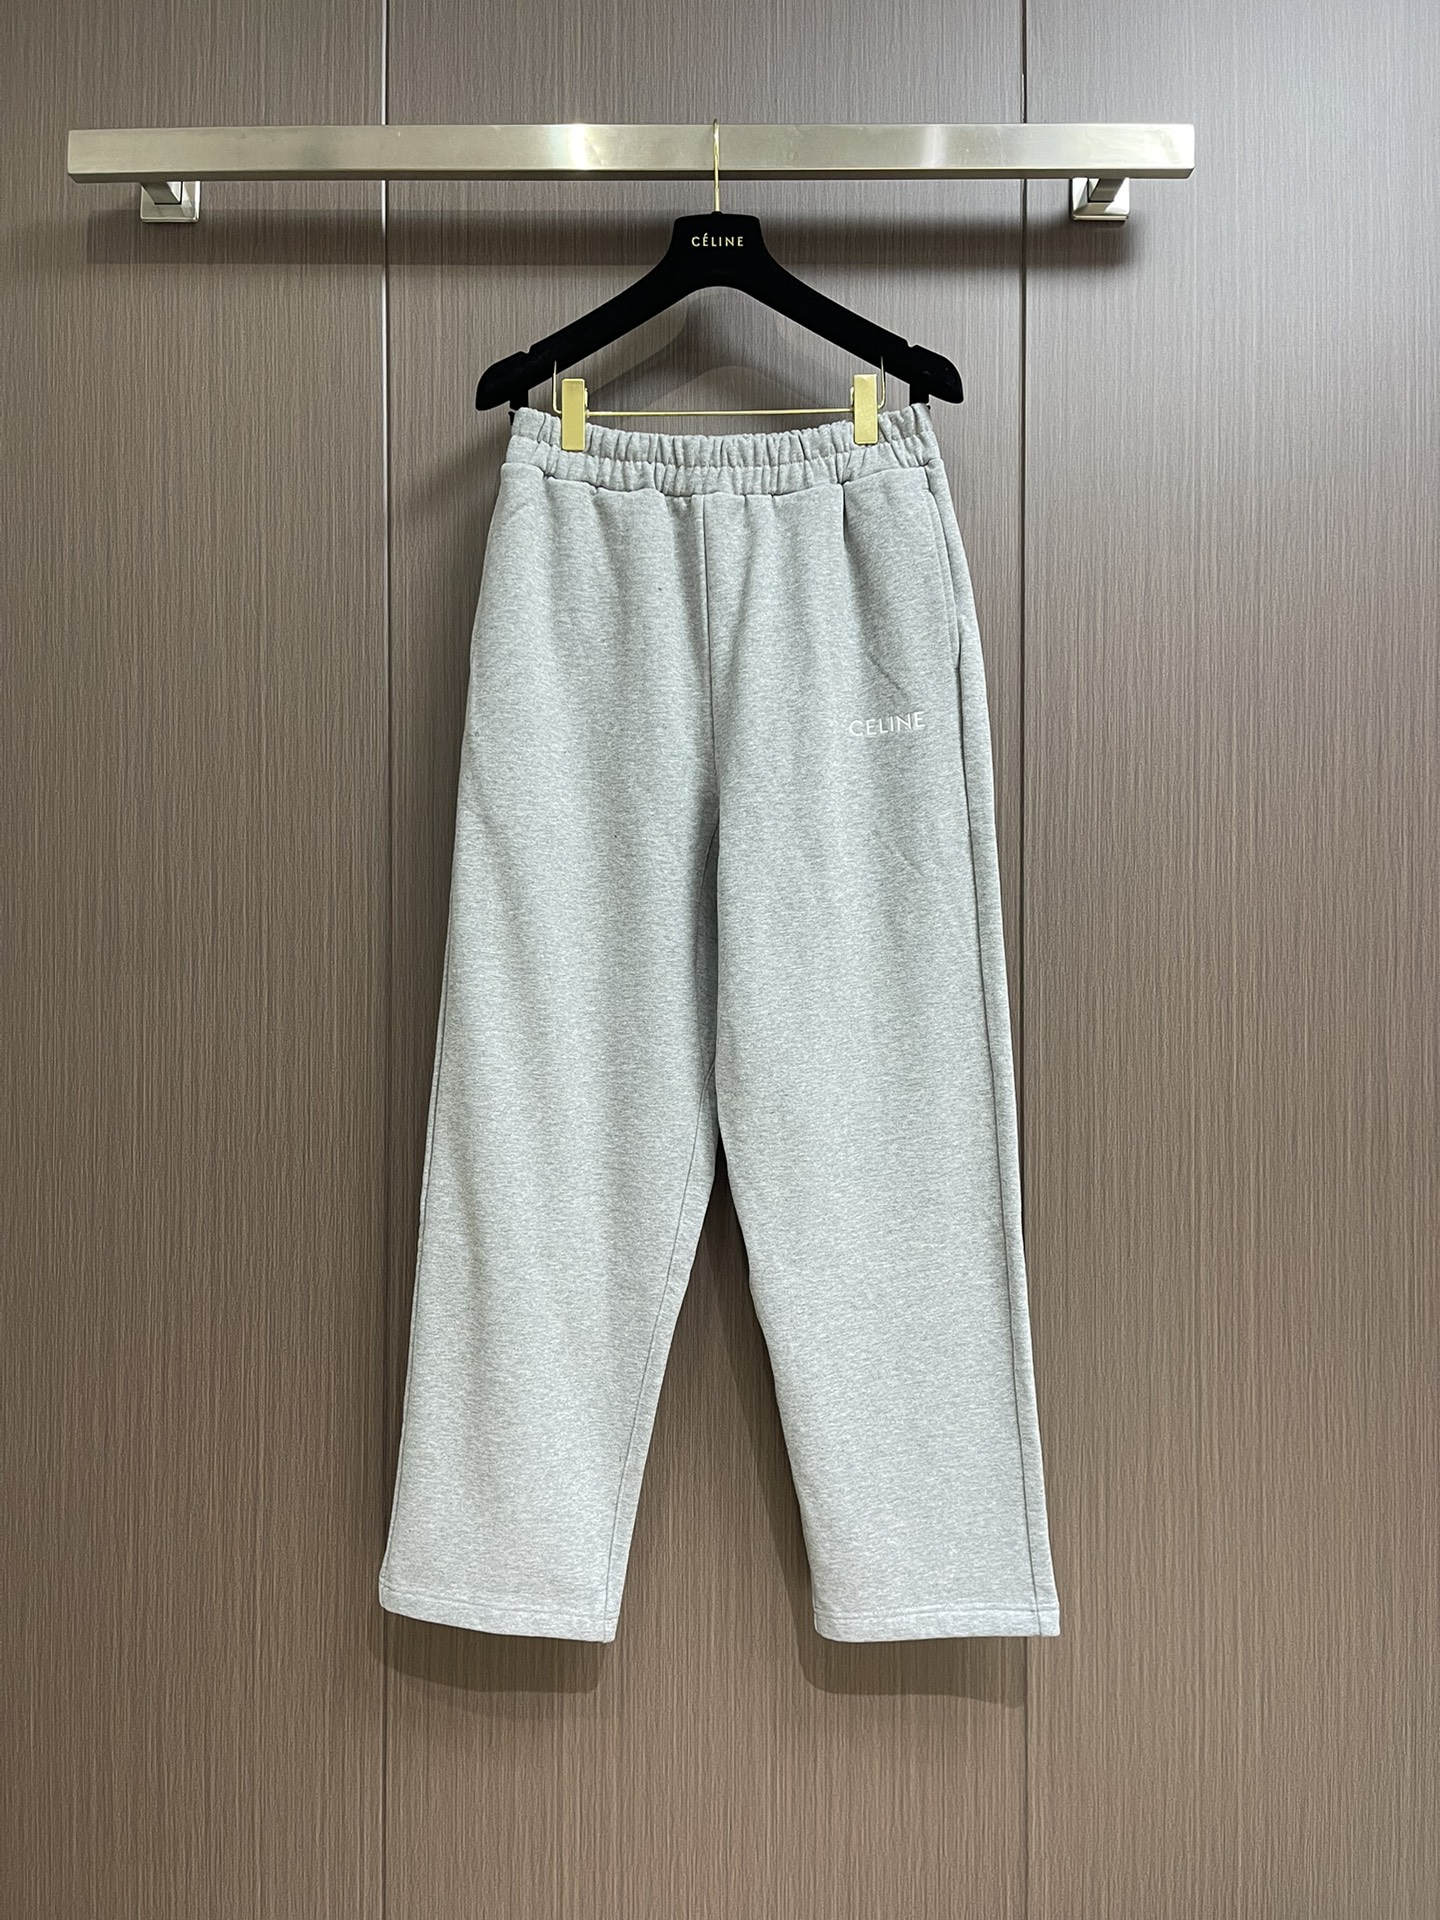 Celine Clothing Pants & Trousers Unisex Cotton Spring Collection Fashion Casual